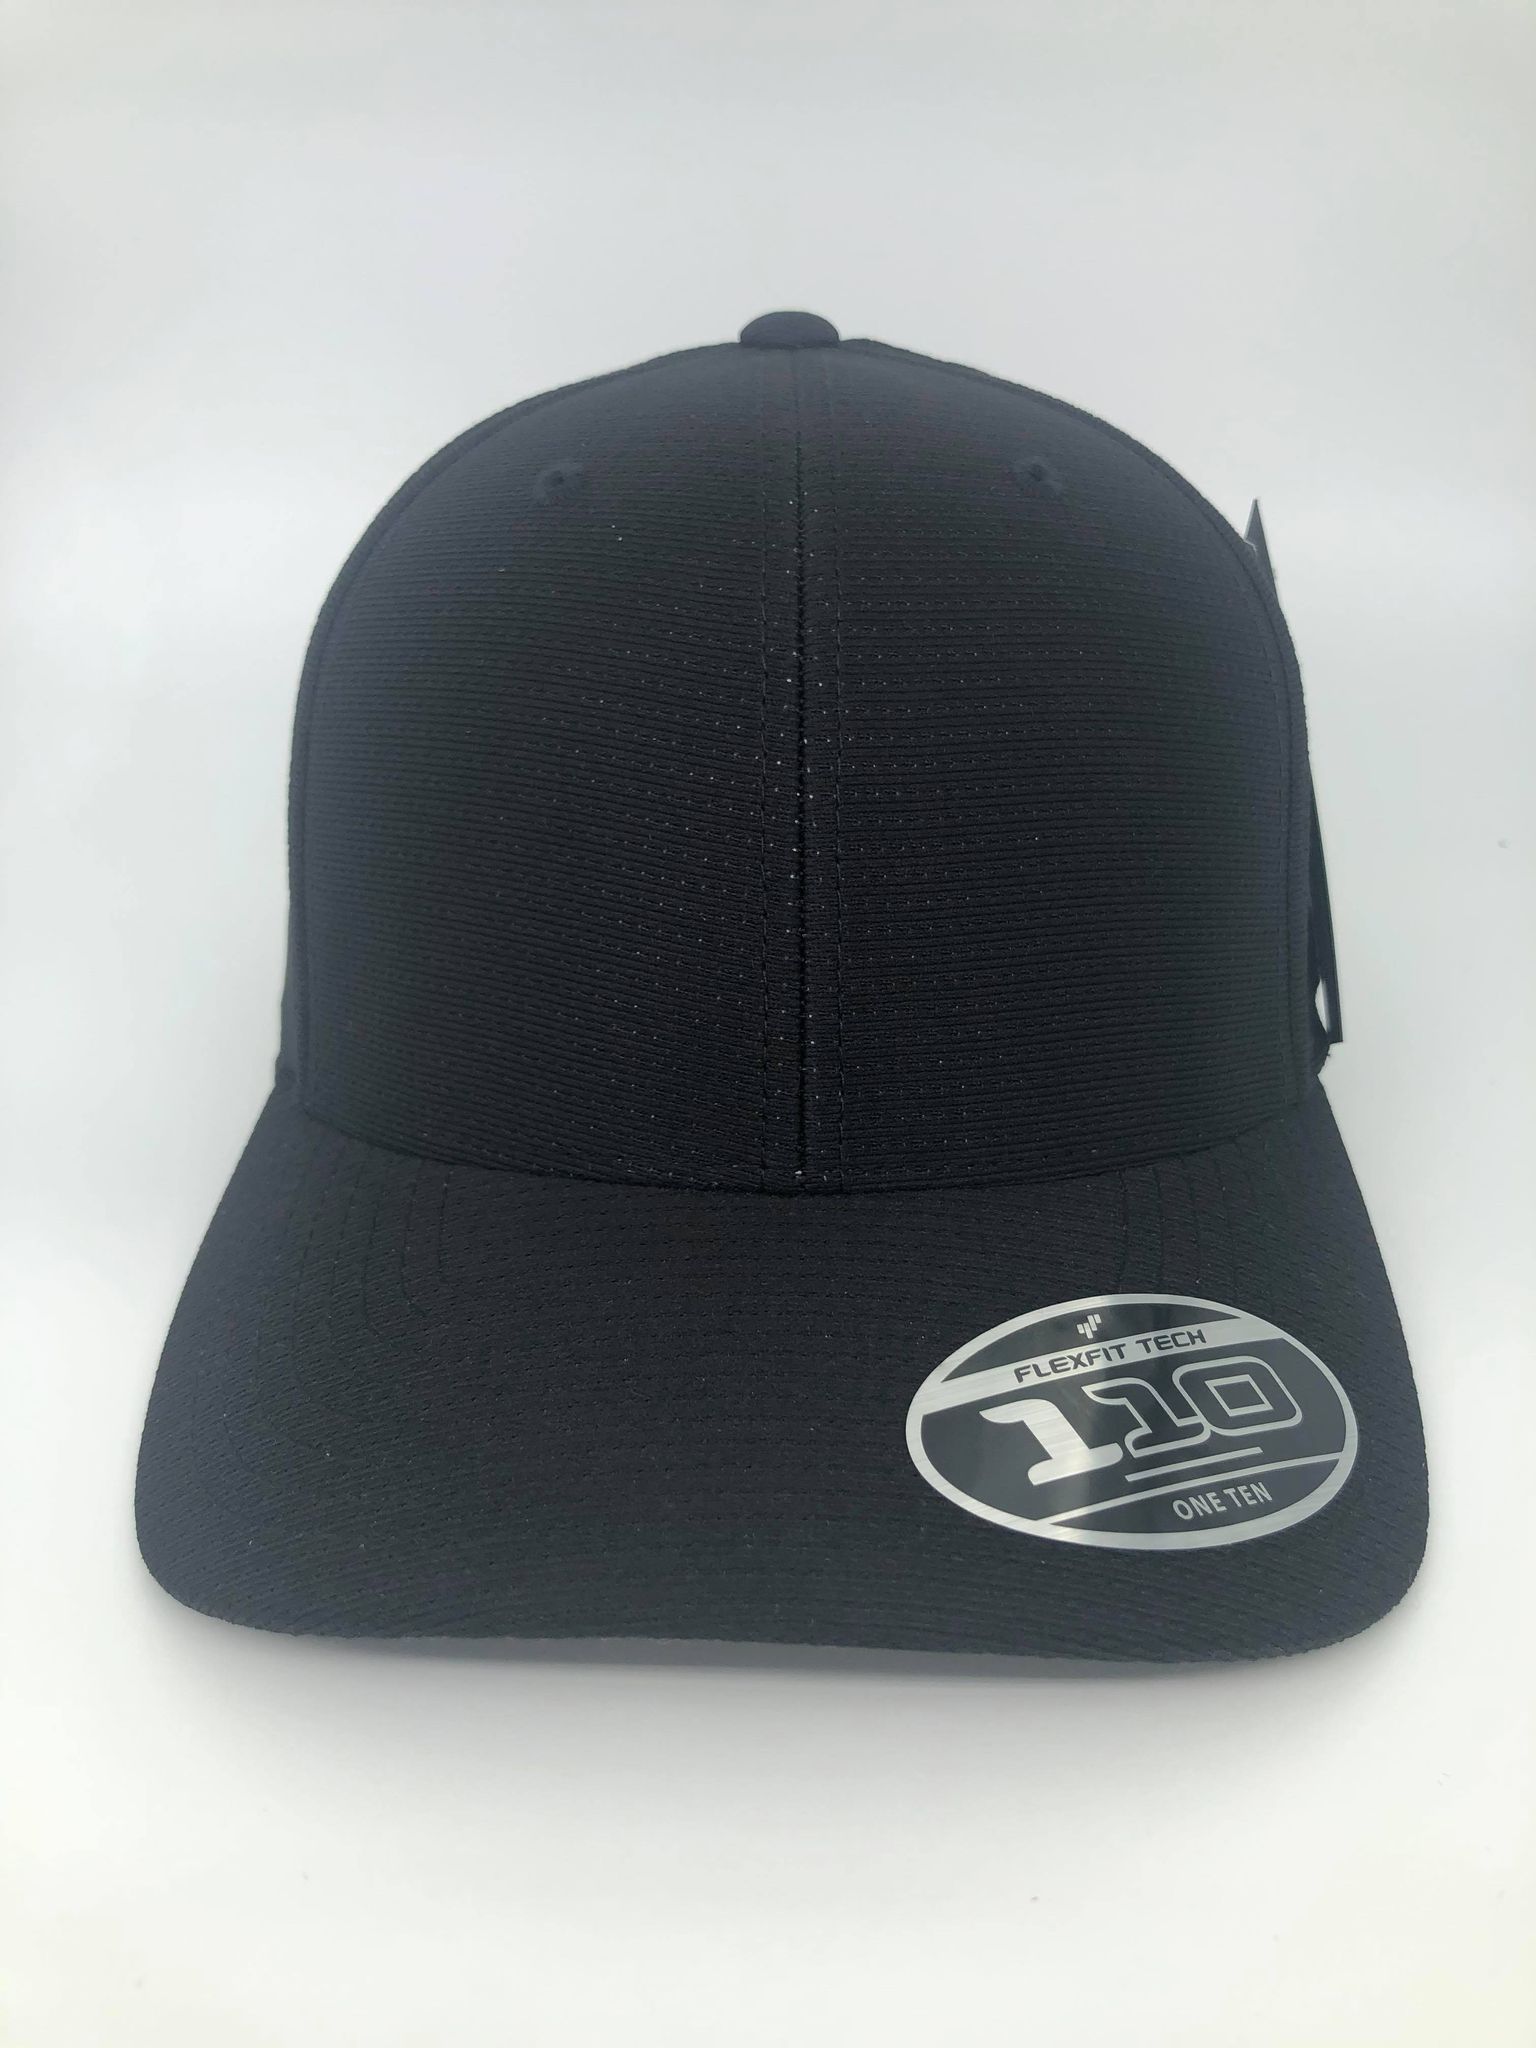 Flexfit 110CD Cool & Dry Caps - Buy direct from Australian Supplier